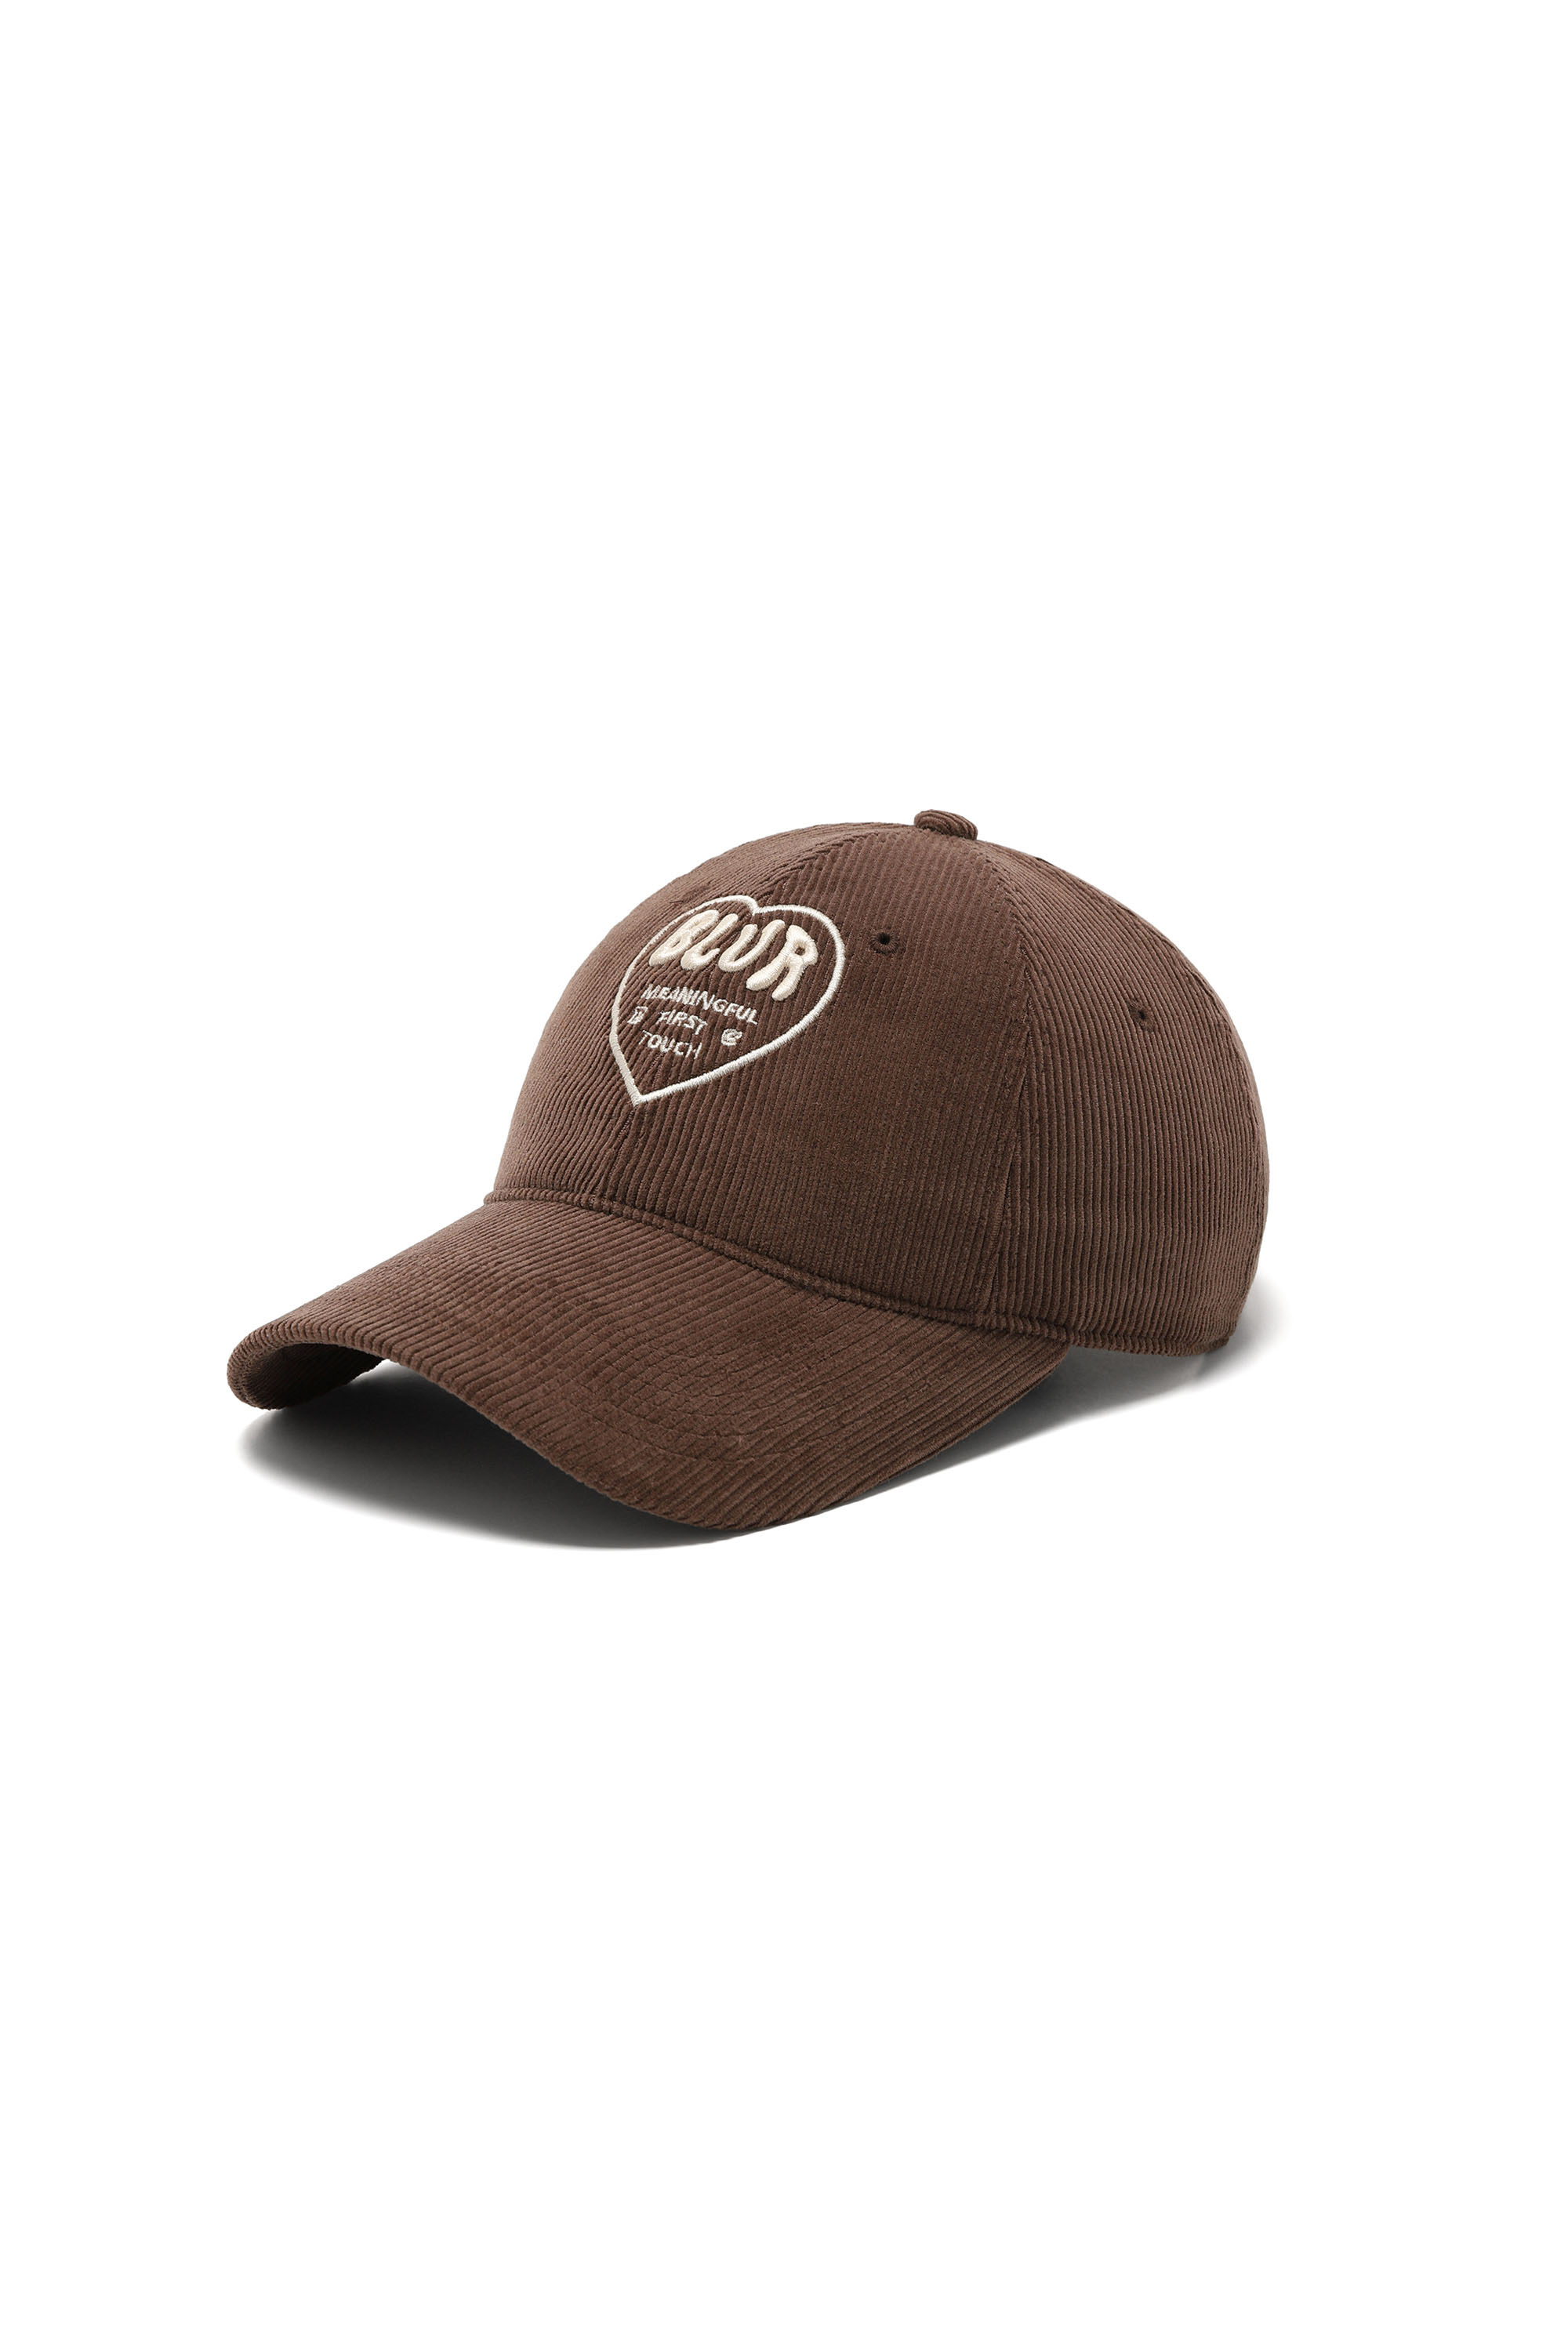 HEART EMBROIDERED CORDUROY CAP - BROWN